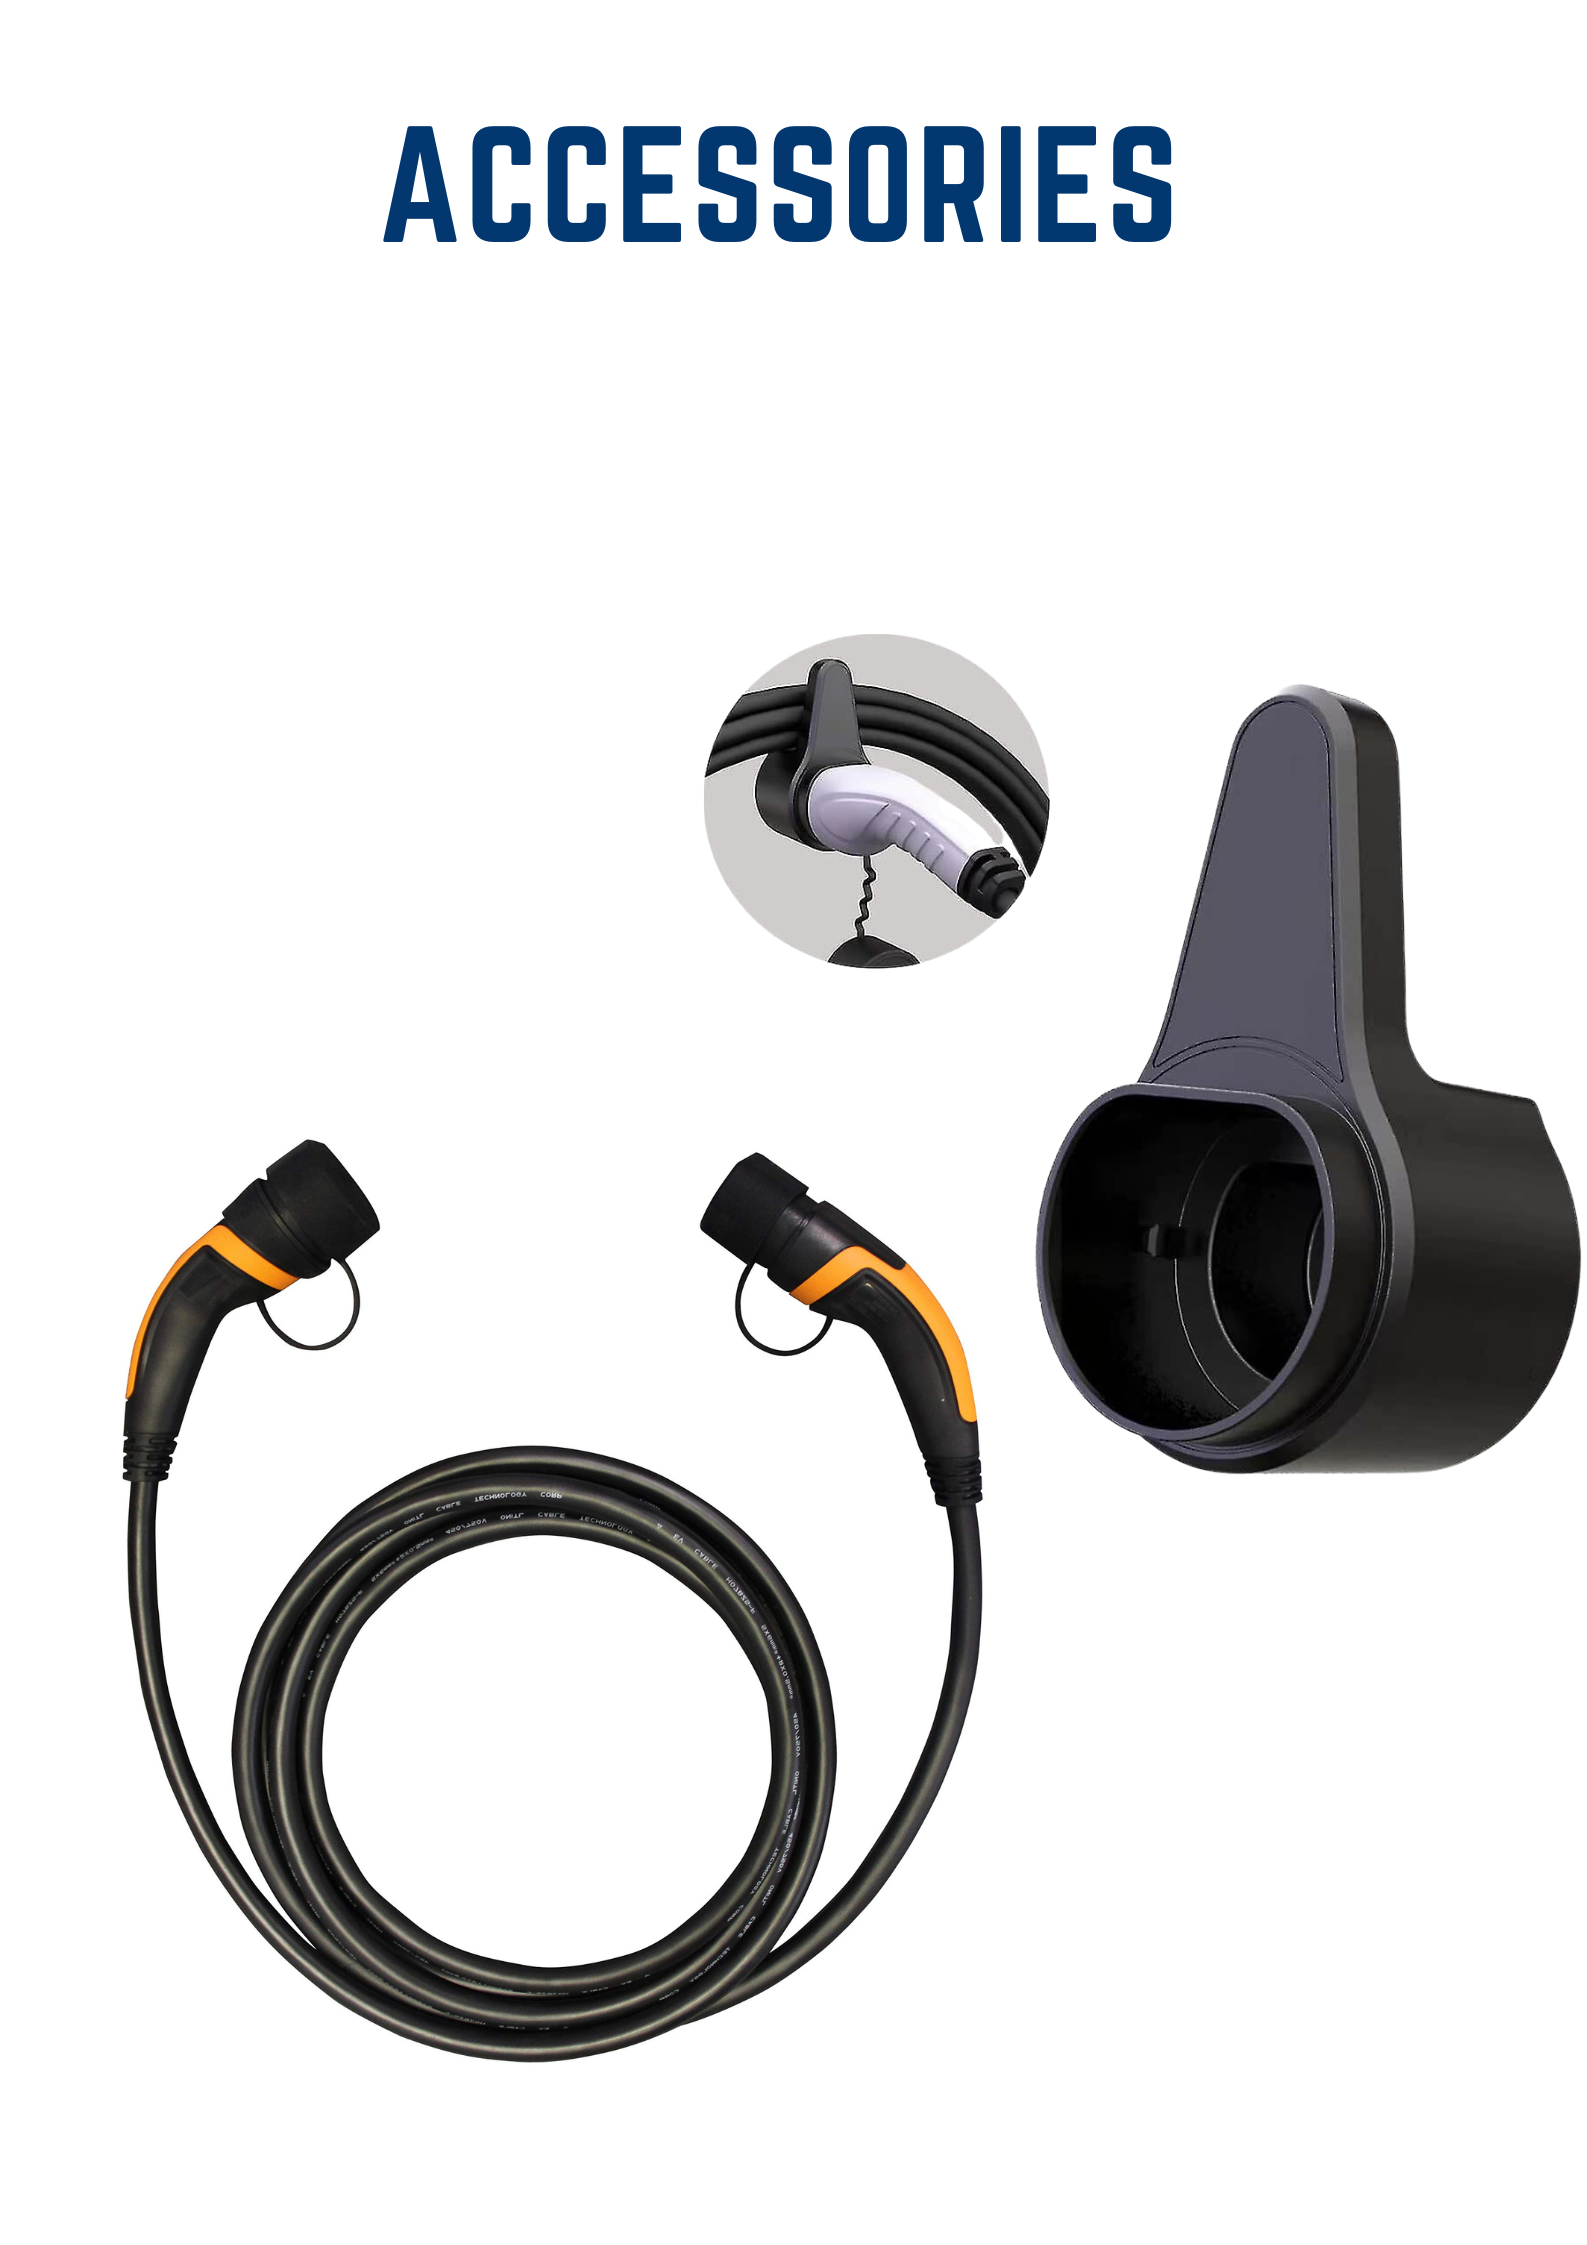 Accessories for EV Chargers